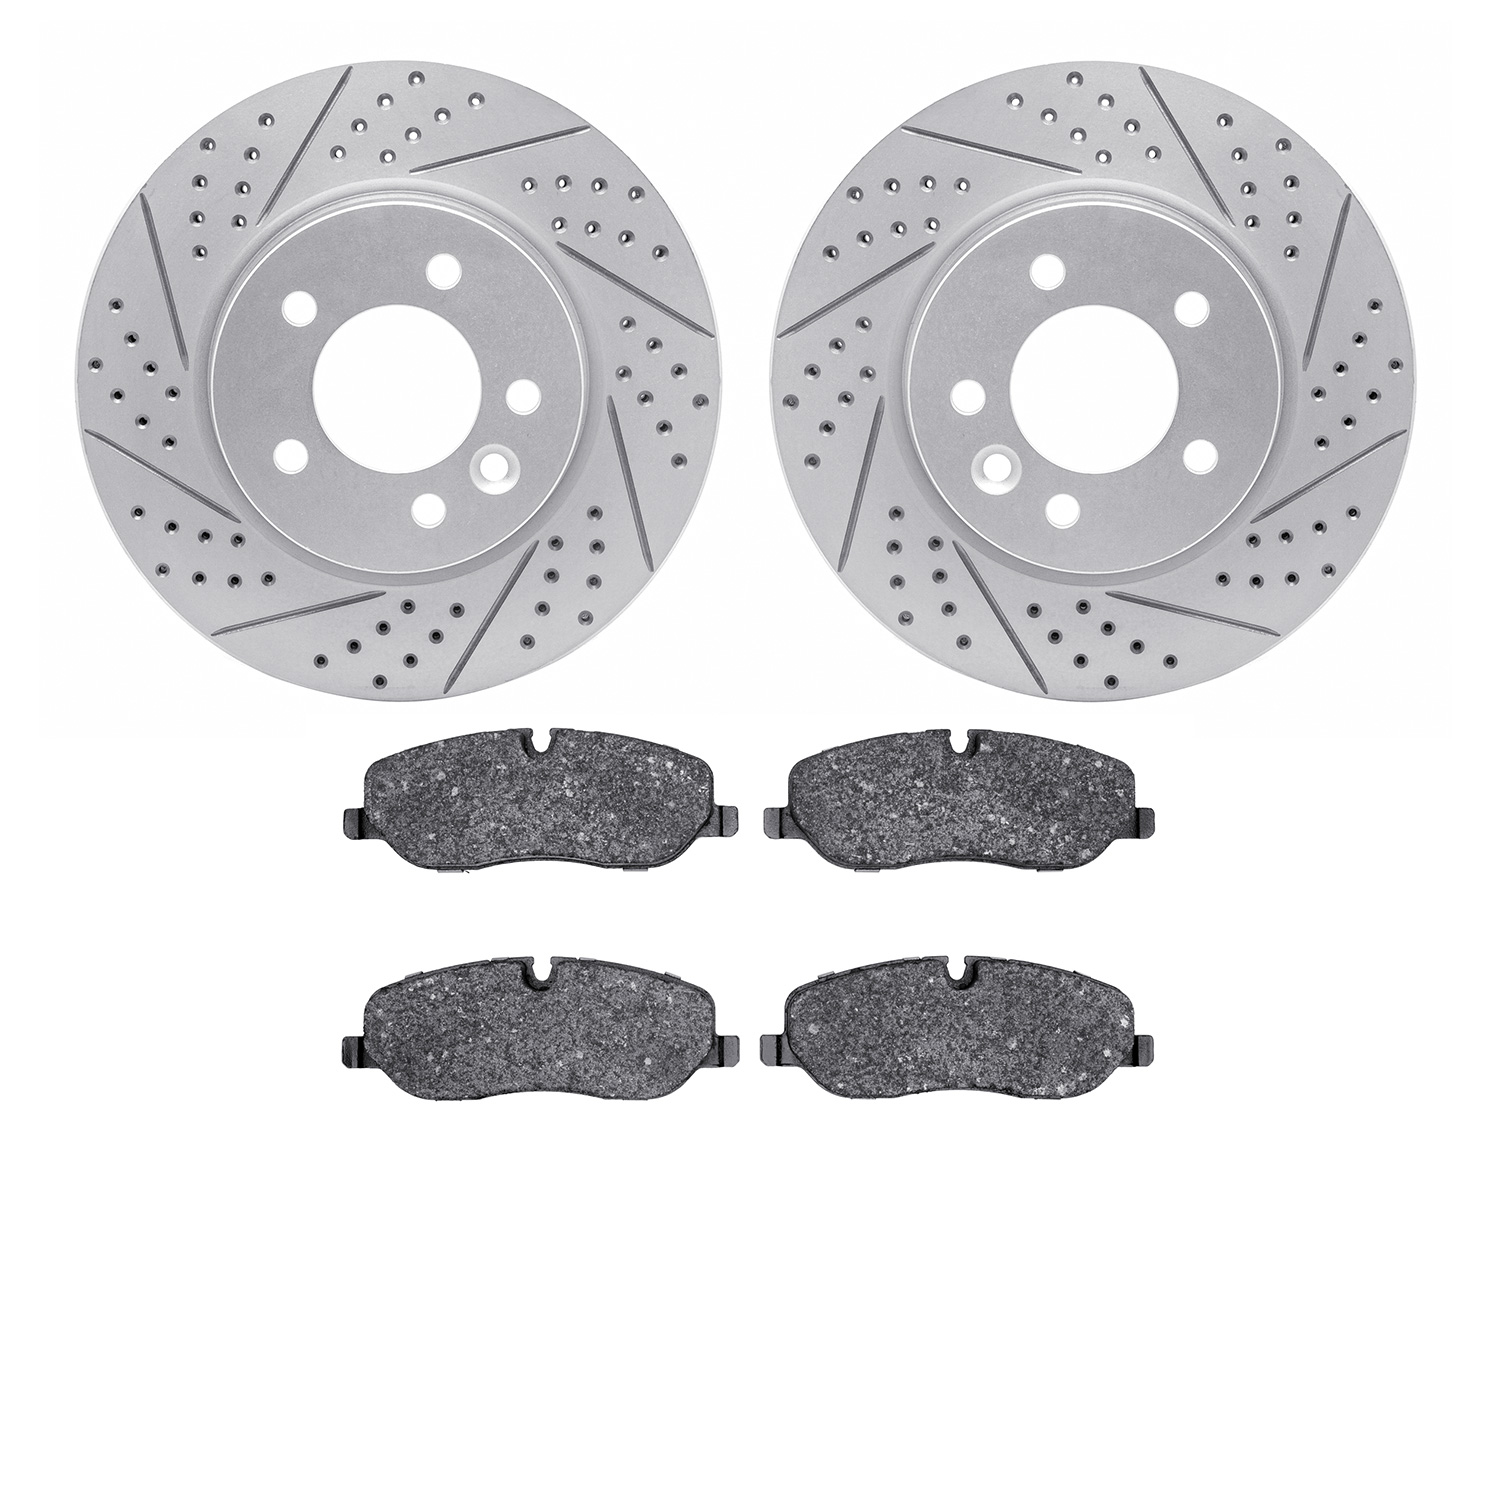 2602-11030 Geoperformance Drilled/Slotted Rotors w/5000 Euro Ceramic Brake Pads Kit, 2005-2007 Land Rover, Position: Front